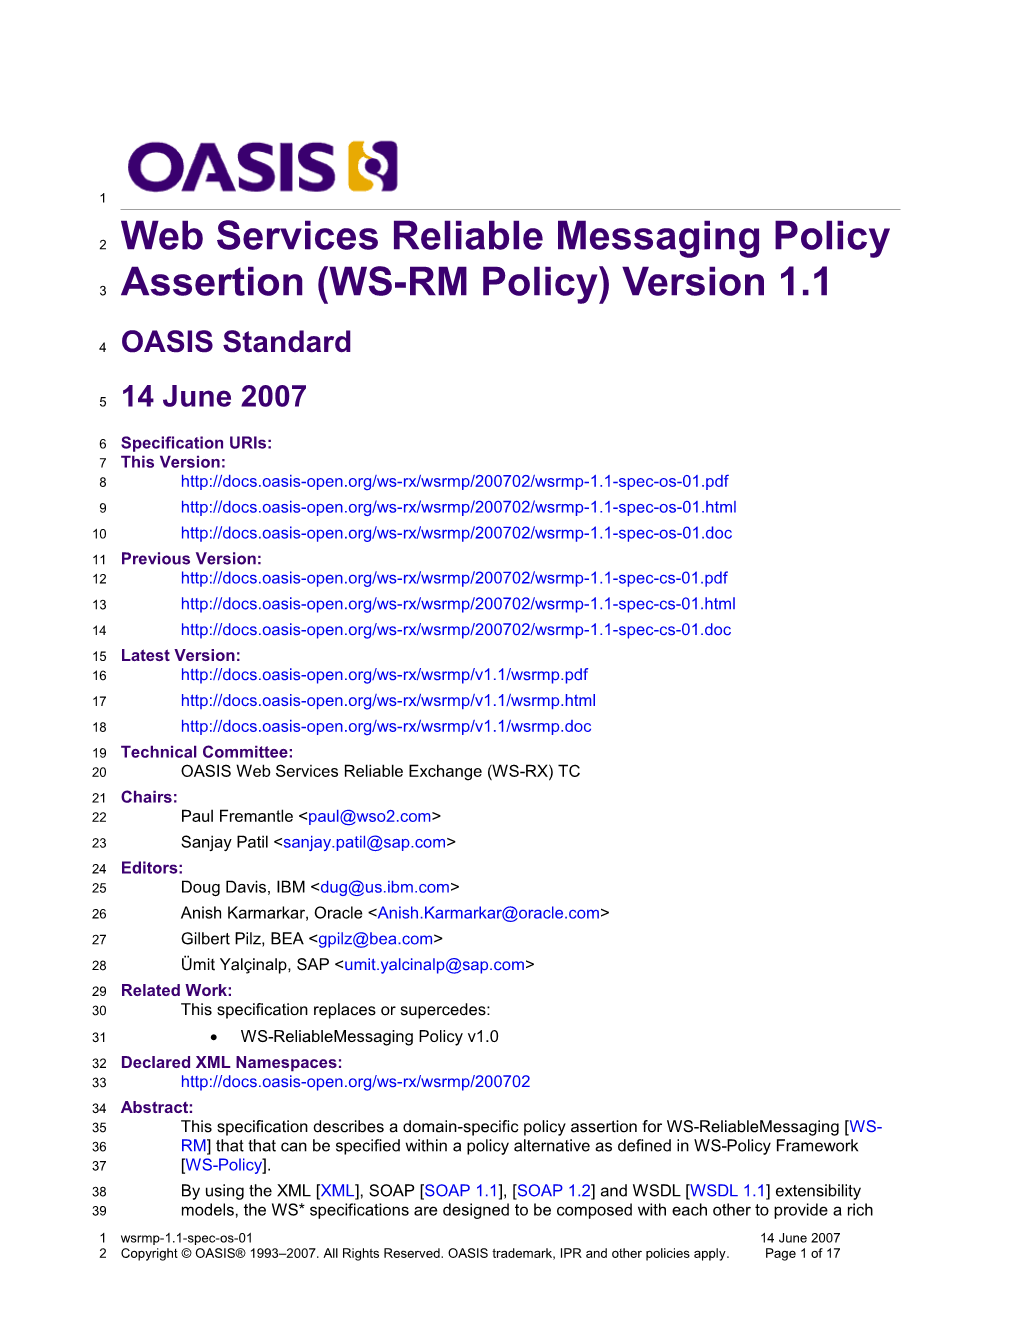 Web Services Reliablemessaging Policy Assertion (WS-RM Policy) Version 1.1